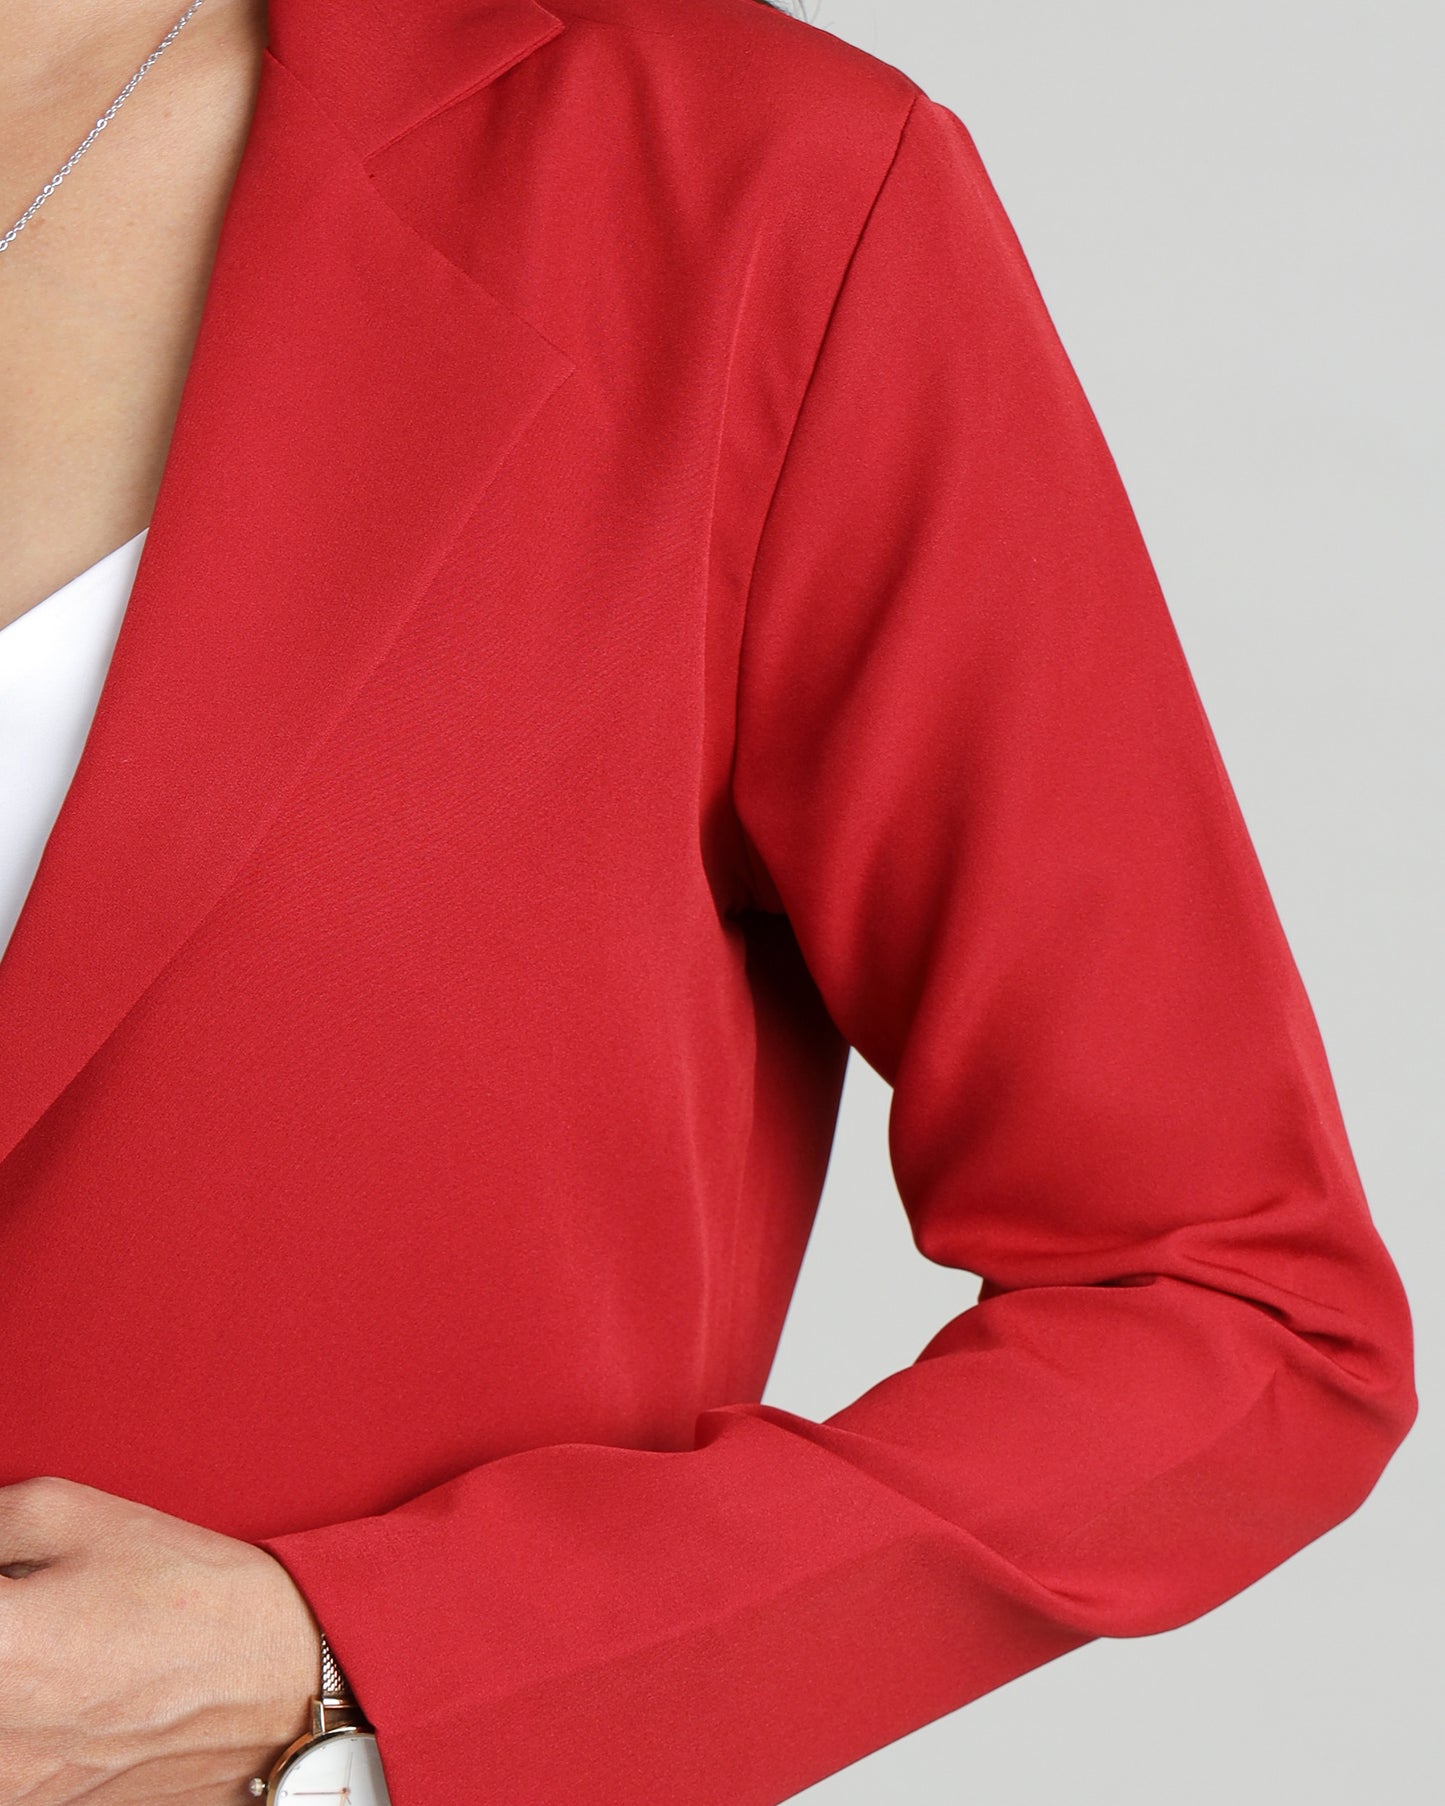 The Red Edit: A Simple Jacket for a Standout Look